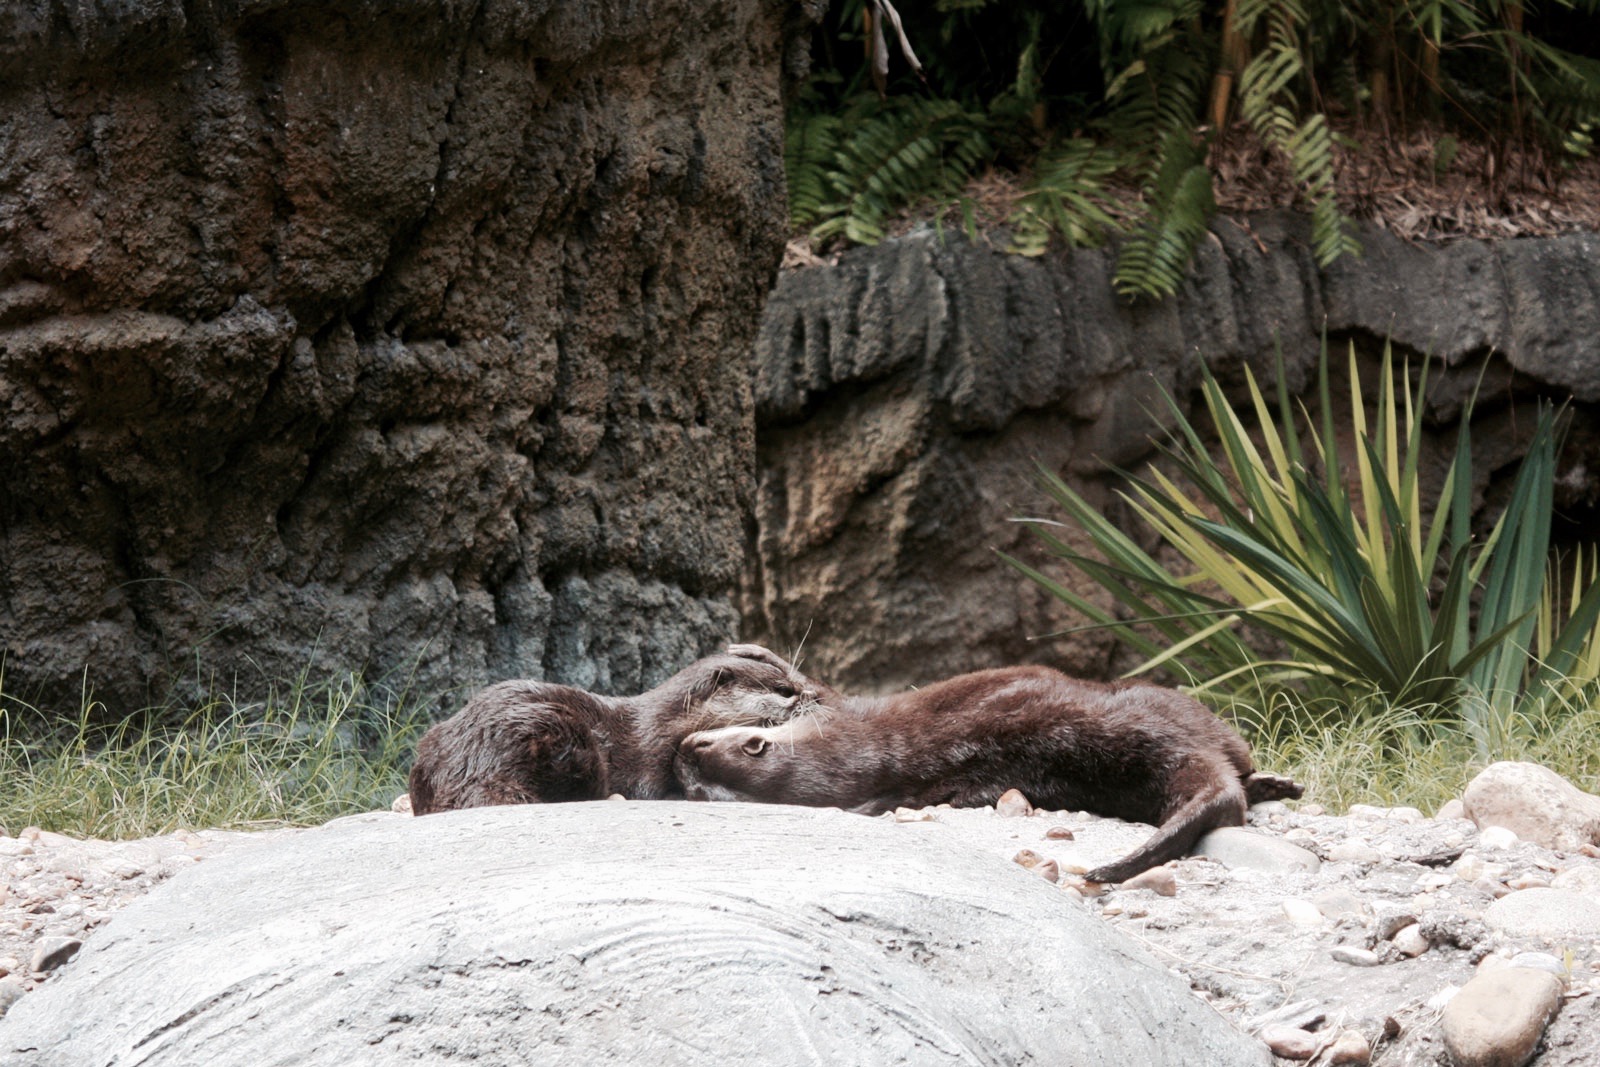 Otters at the Jacksonville Zoo